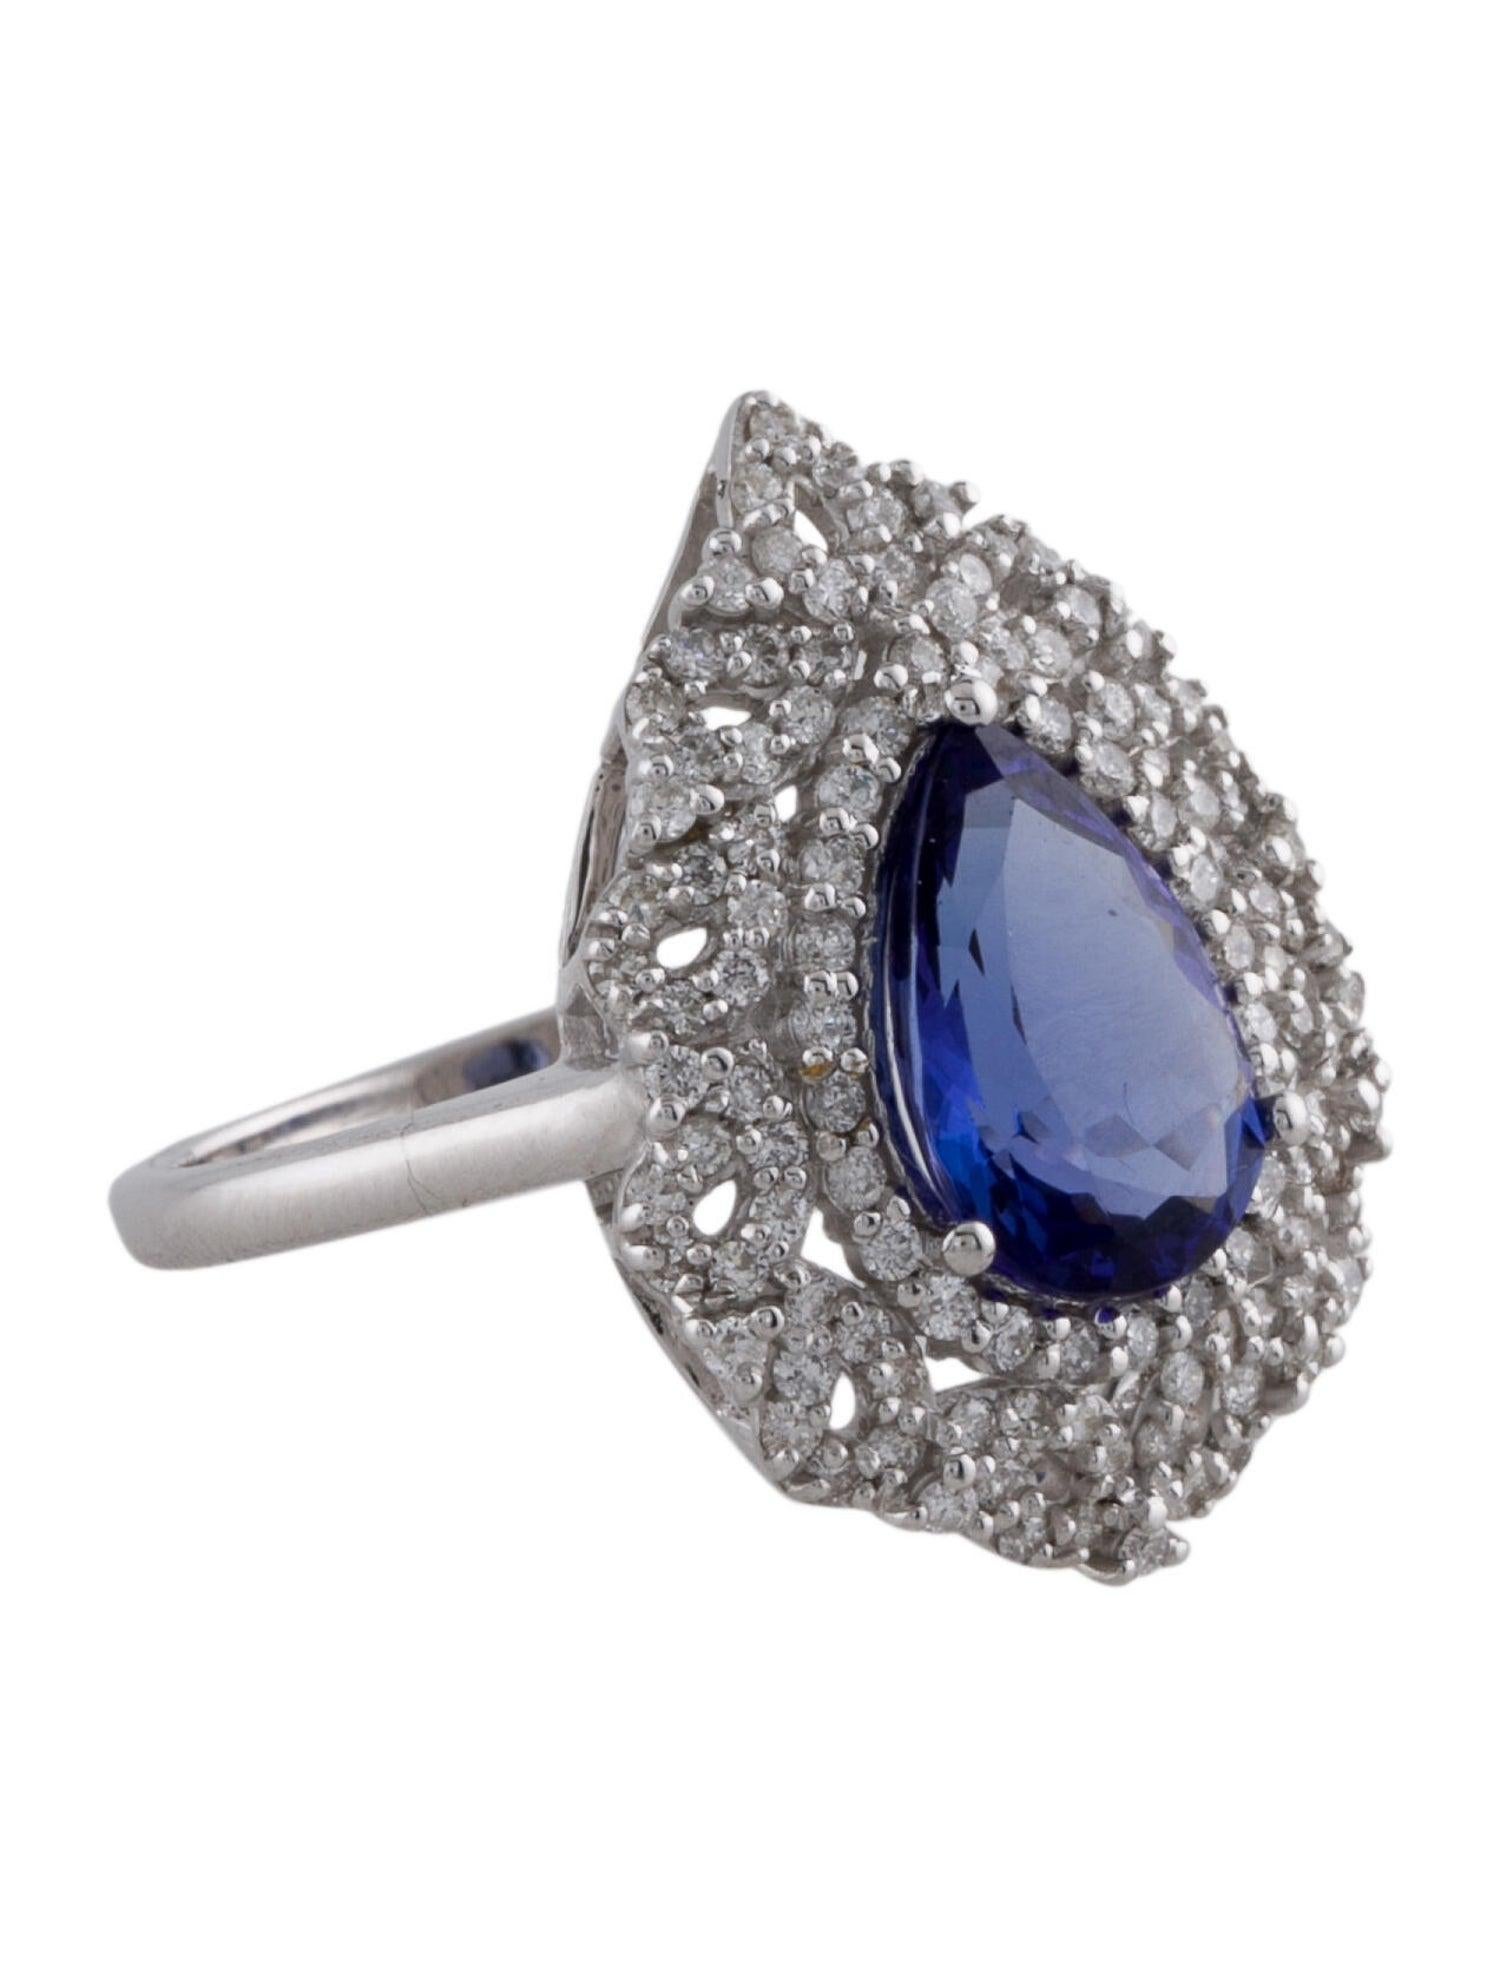 Step into a world of elegance with our 14K White Gold Tanzanite and Diamond Cocktail Ring, a symbol of luxury and sophistication. This exquisite piece is centered around a breathtaking 2.48 carat pear-shaped Tanzanite, known for its deep blue hue